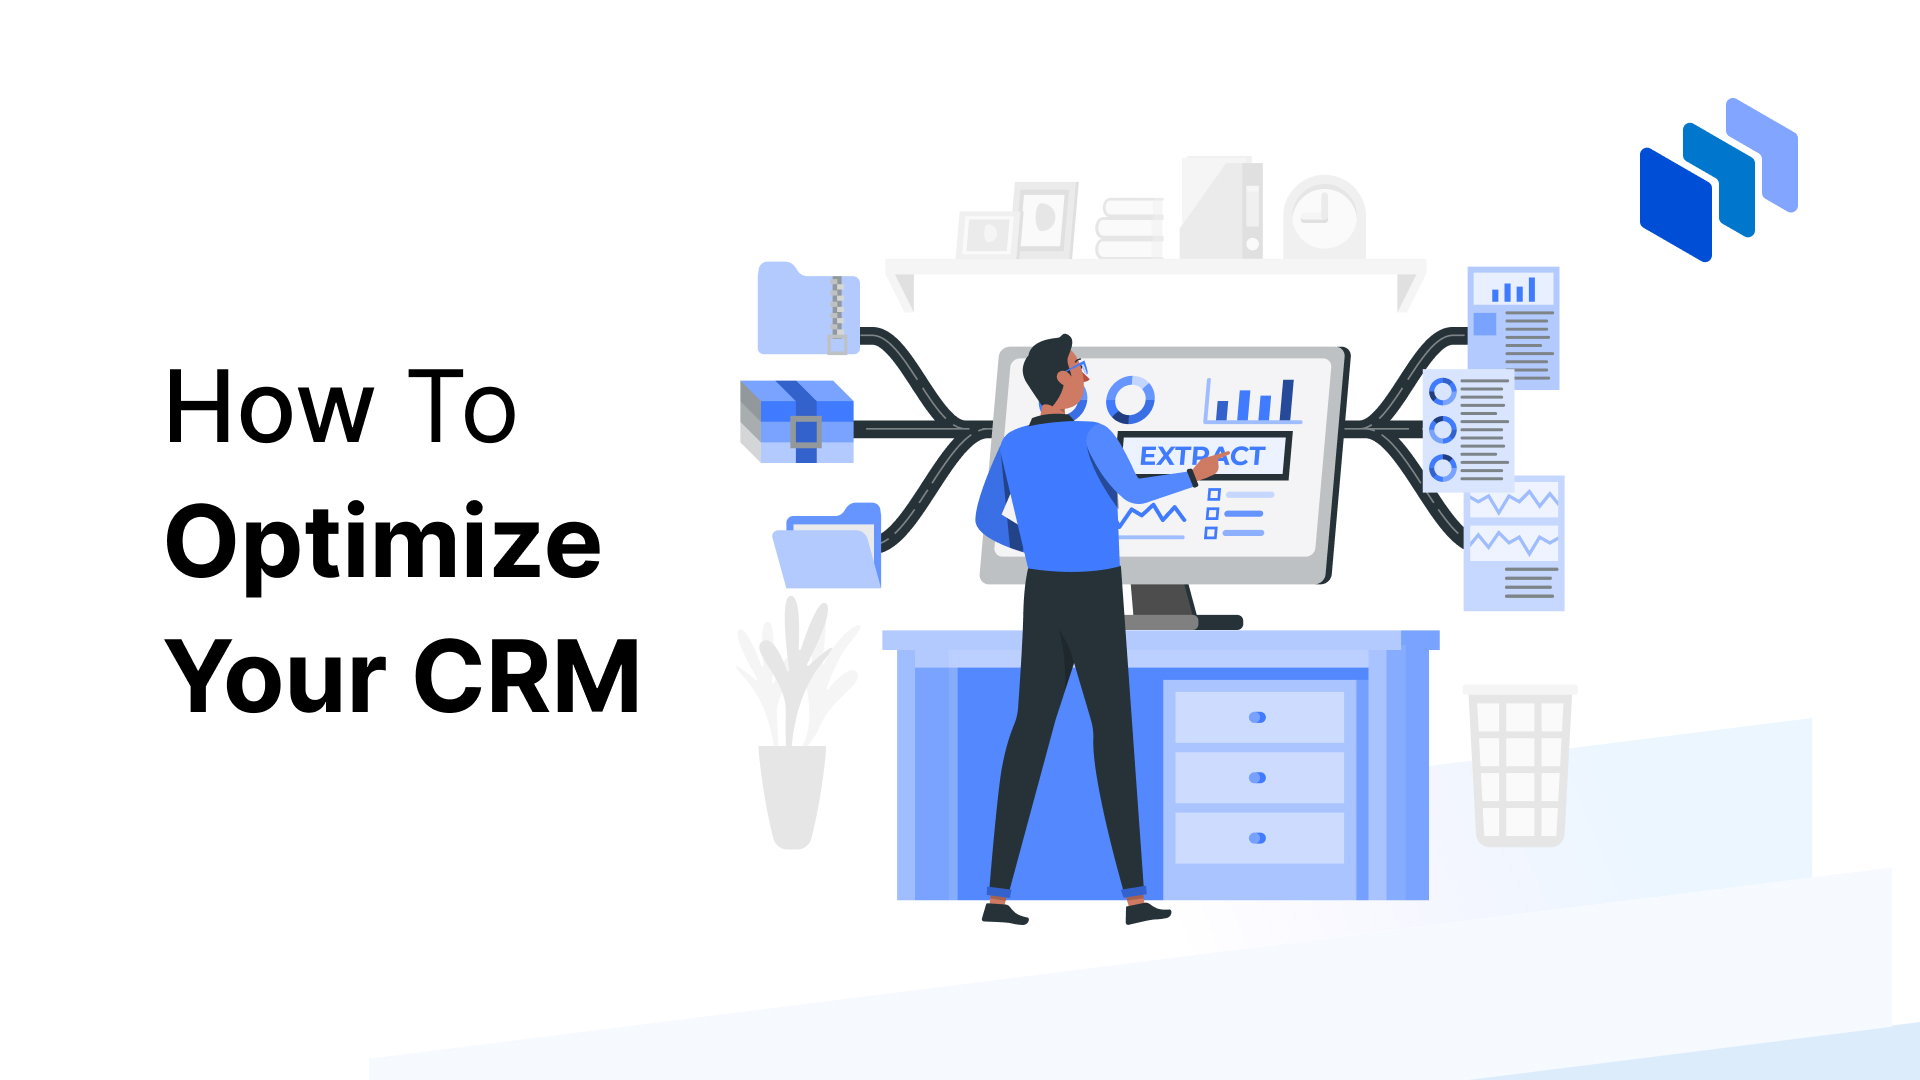 How to Optimize Your CRM